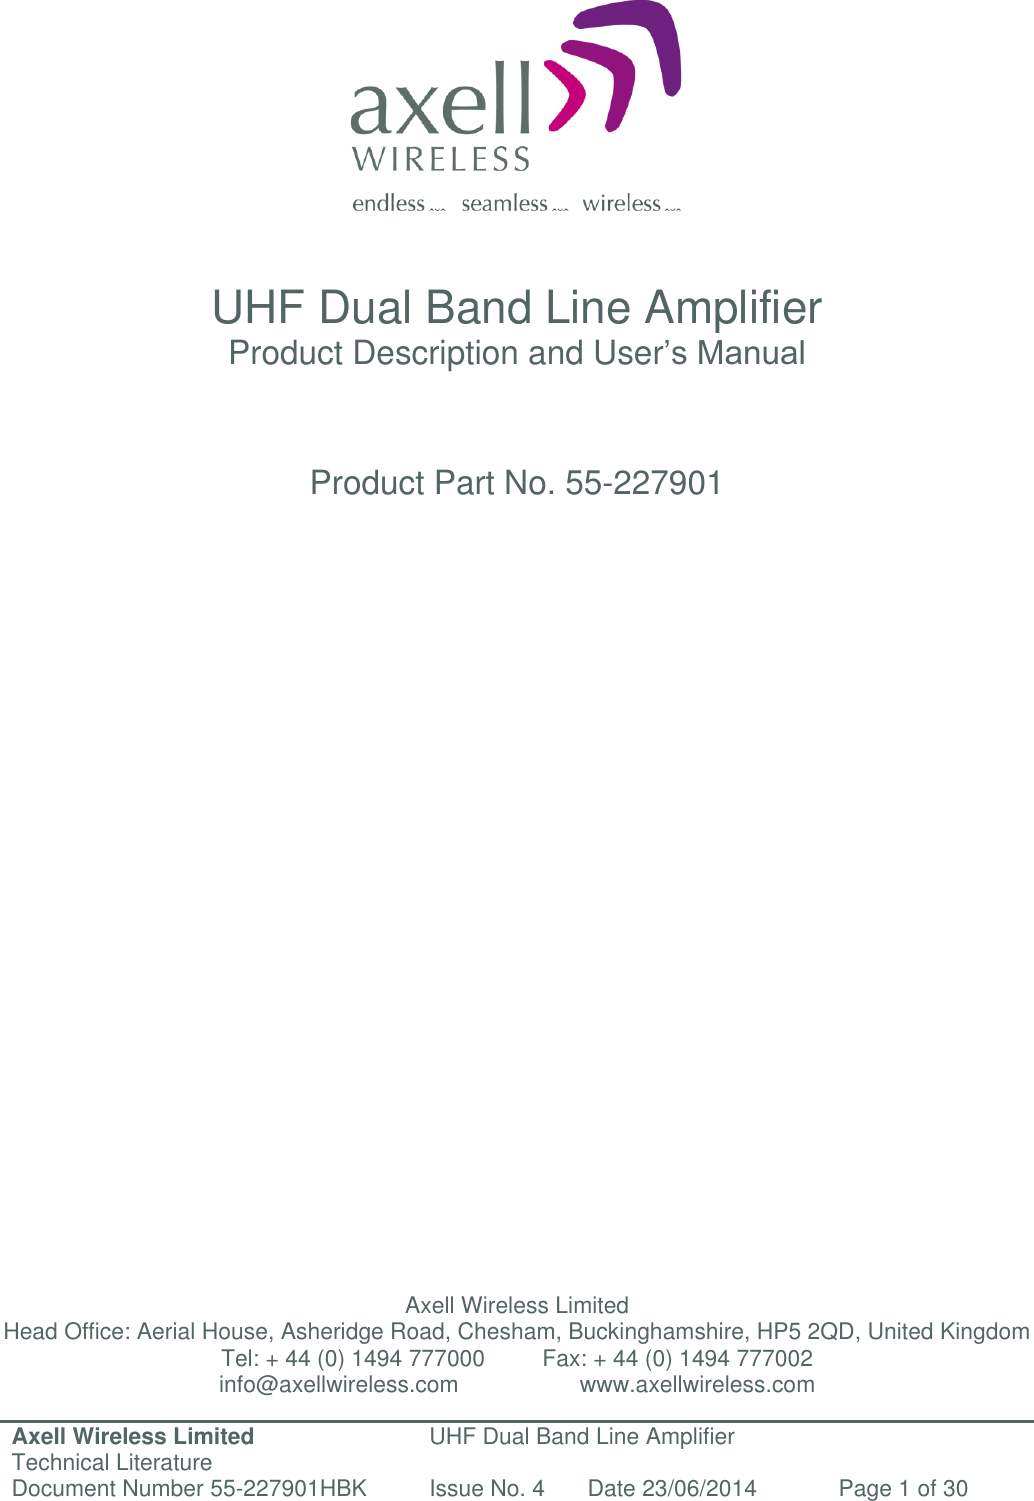 Axell Wireless Limited Technical Literature UHF Dual Band Line Amplifier Document Number 55-227901HBK Issue No. 4 Date 23/06/2014 Page 1 of 30                   UHF Dual Band Line Amplifier Product Description and User’s Manual    Product Part No. 55-227901                               Axell Wireless Limited Head Office: Aerial House, Asheridge Road, Chesham, Buckinghamshire, HP5 2QD, United Kingdom Tel: + 44 (0) 1494 777000         Fax: + 44 (0) 1494 777002 info@axellwireless.com                   www.axellwireless.com   